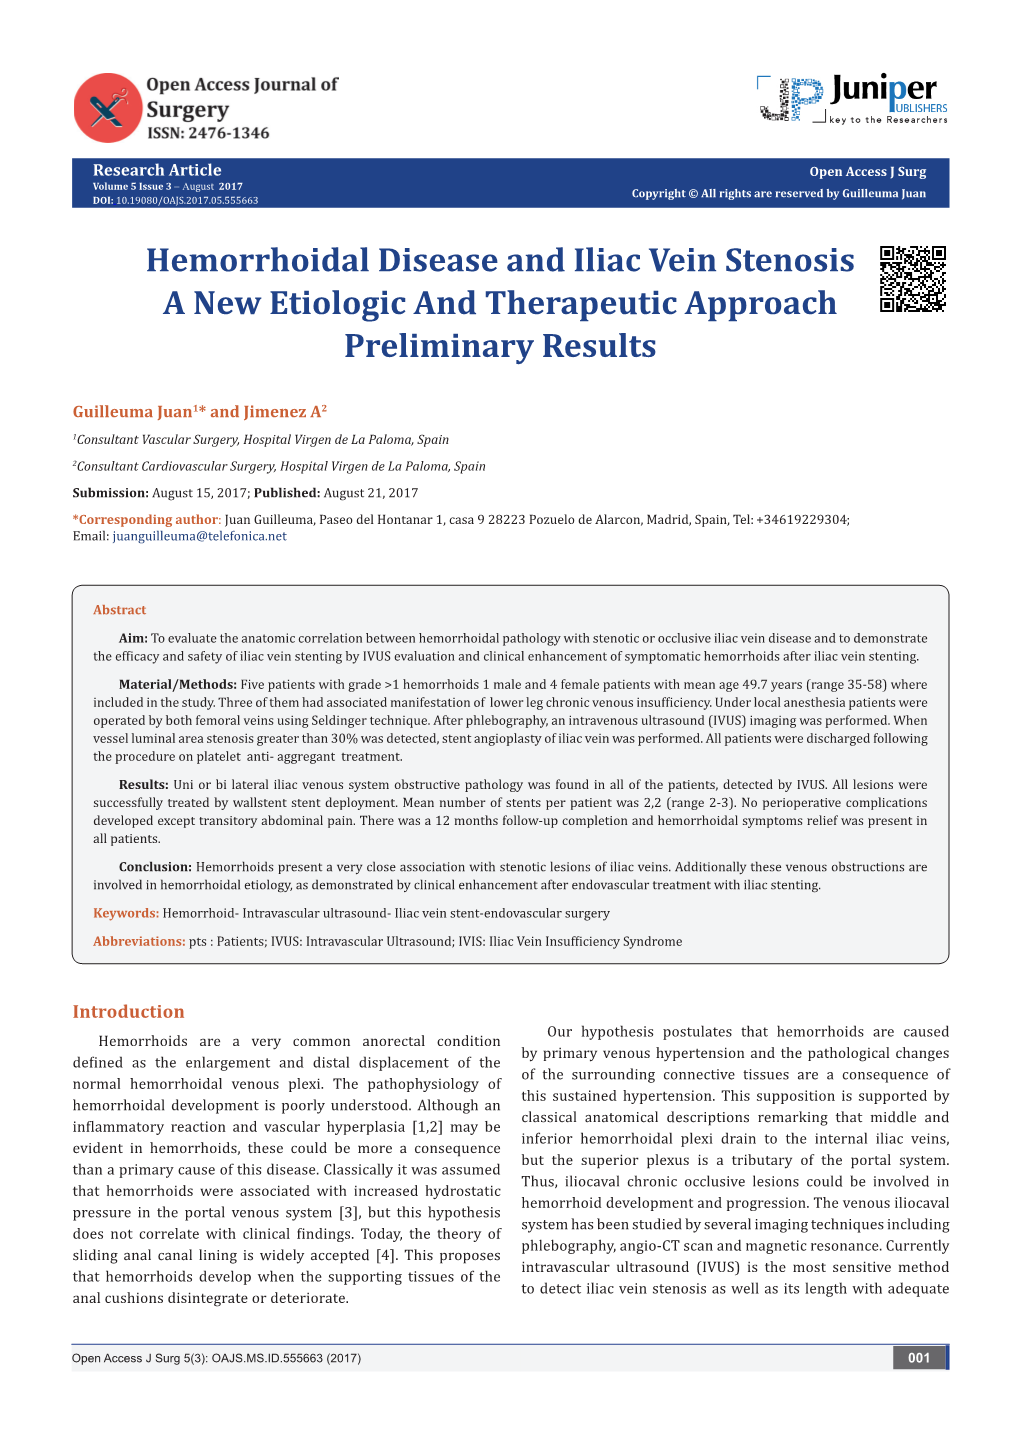 Hemorrhoidal Disease and Iliac Vein Stenosis a New Etiologic and Therapeutic Approach Preliminary Results